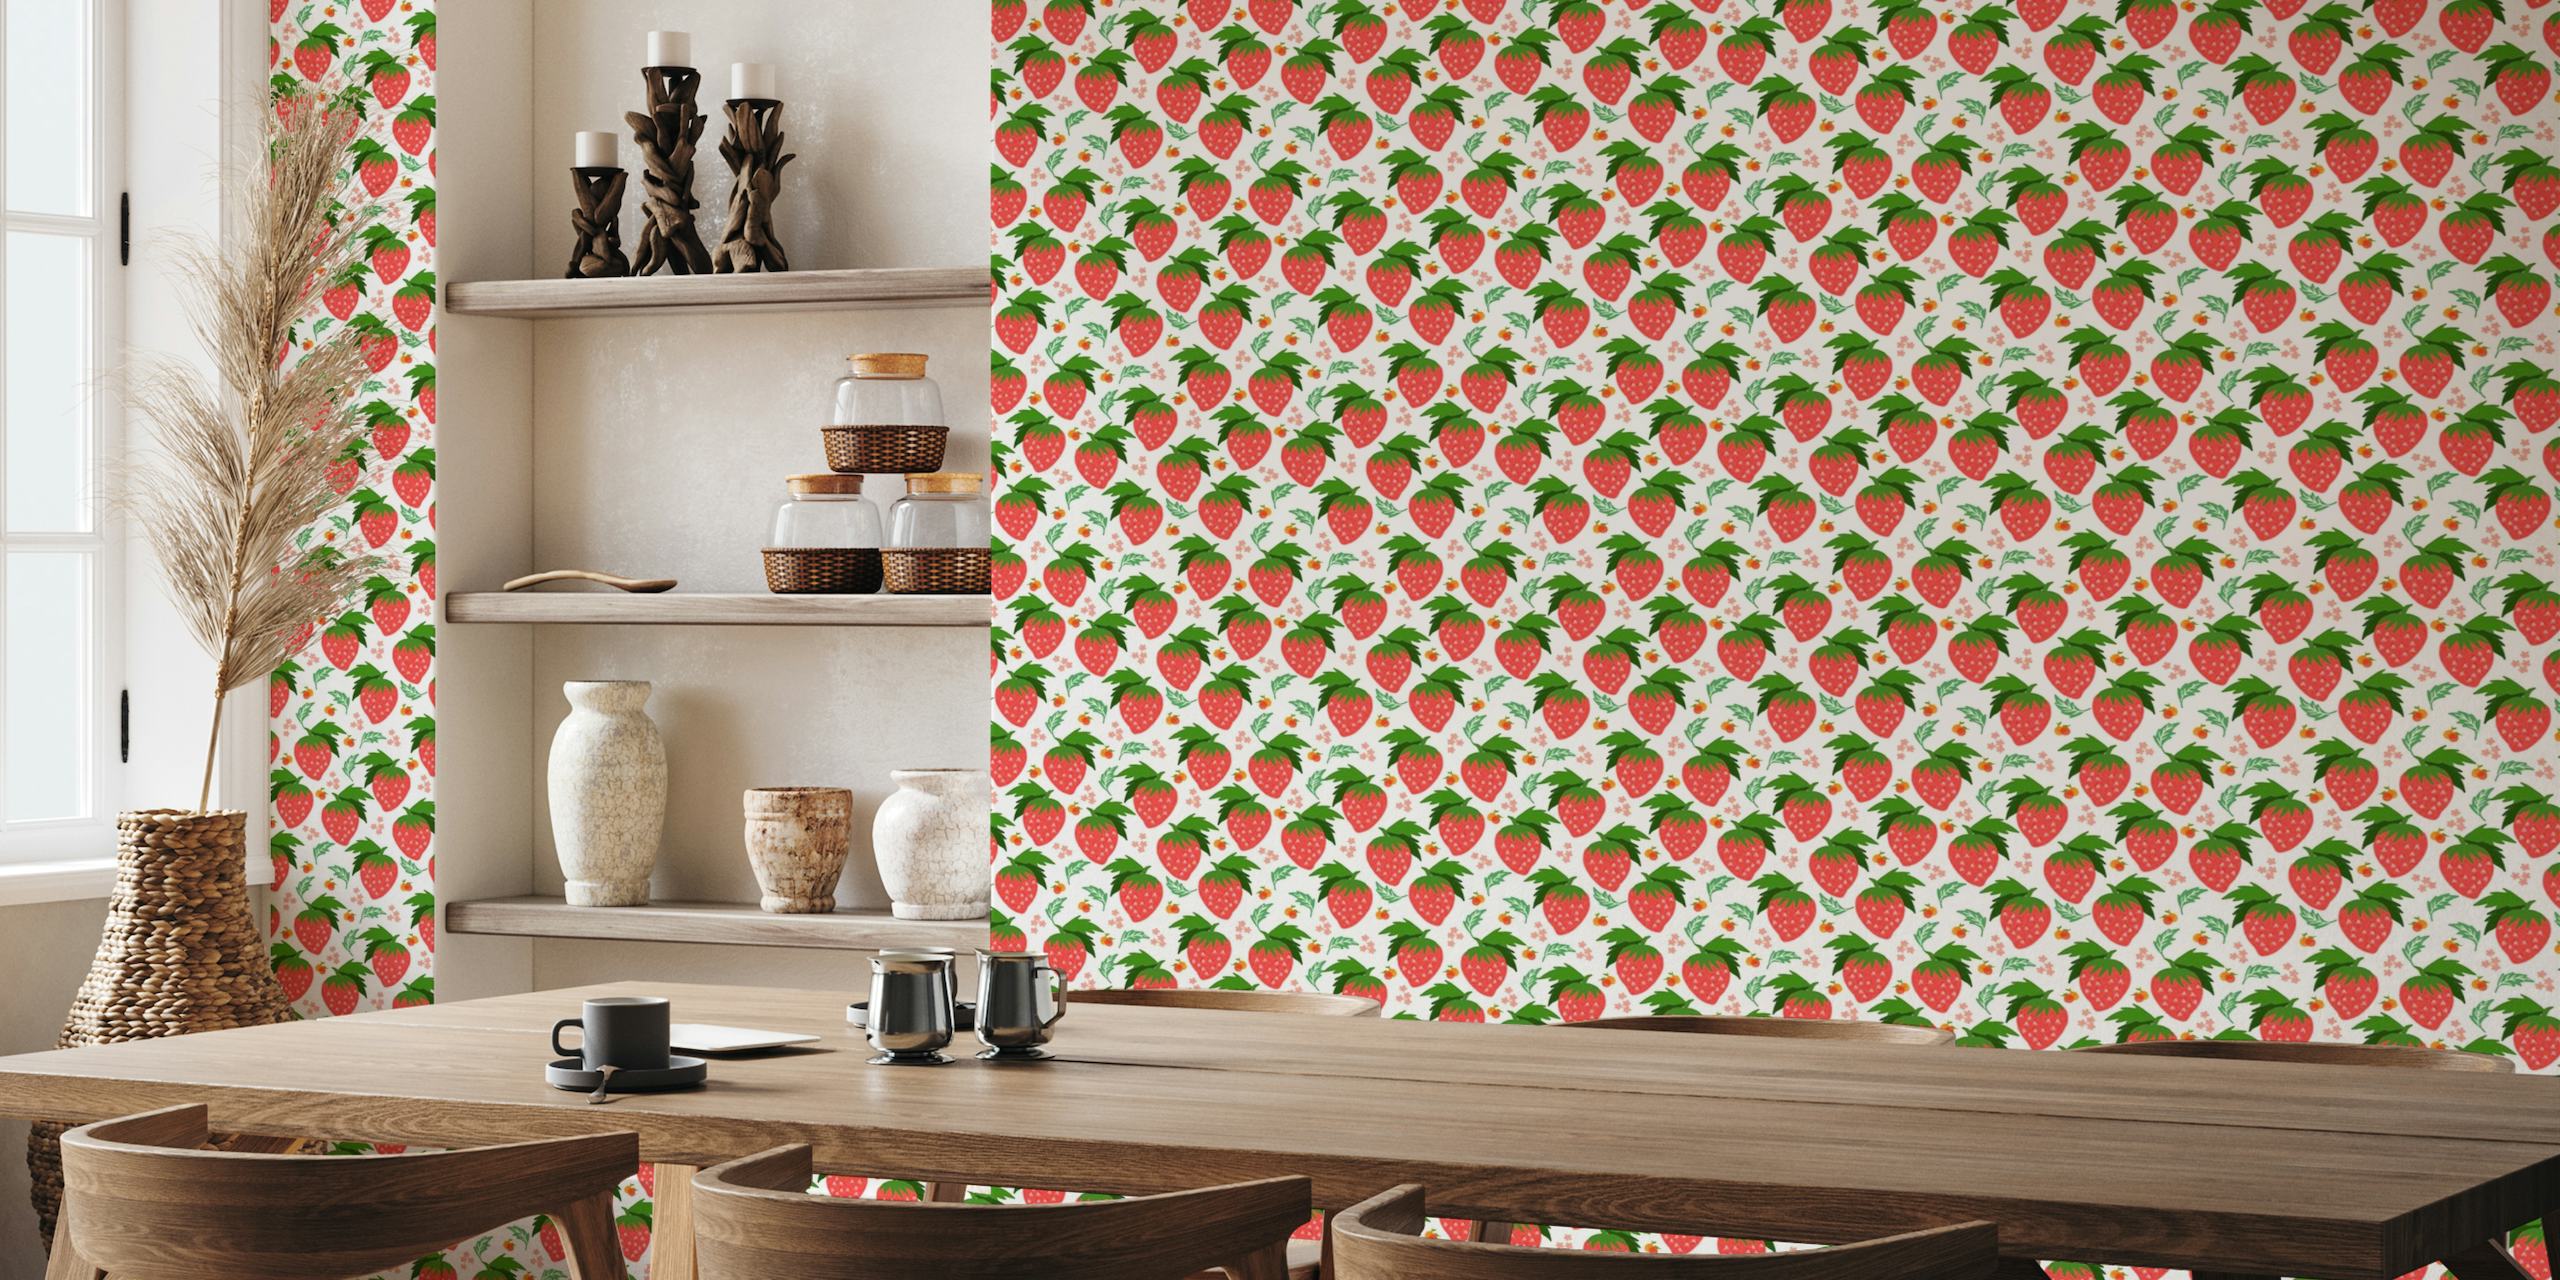 Strawberries fruit tropical pattern on a white background tapetit